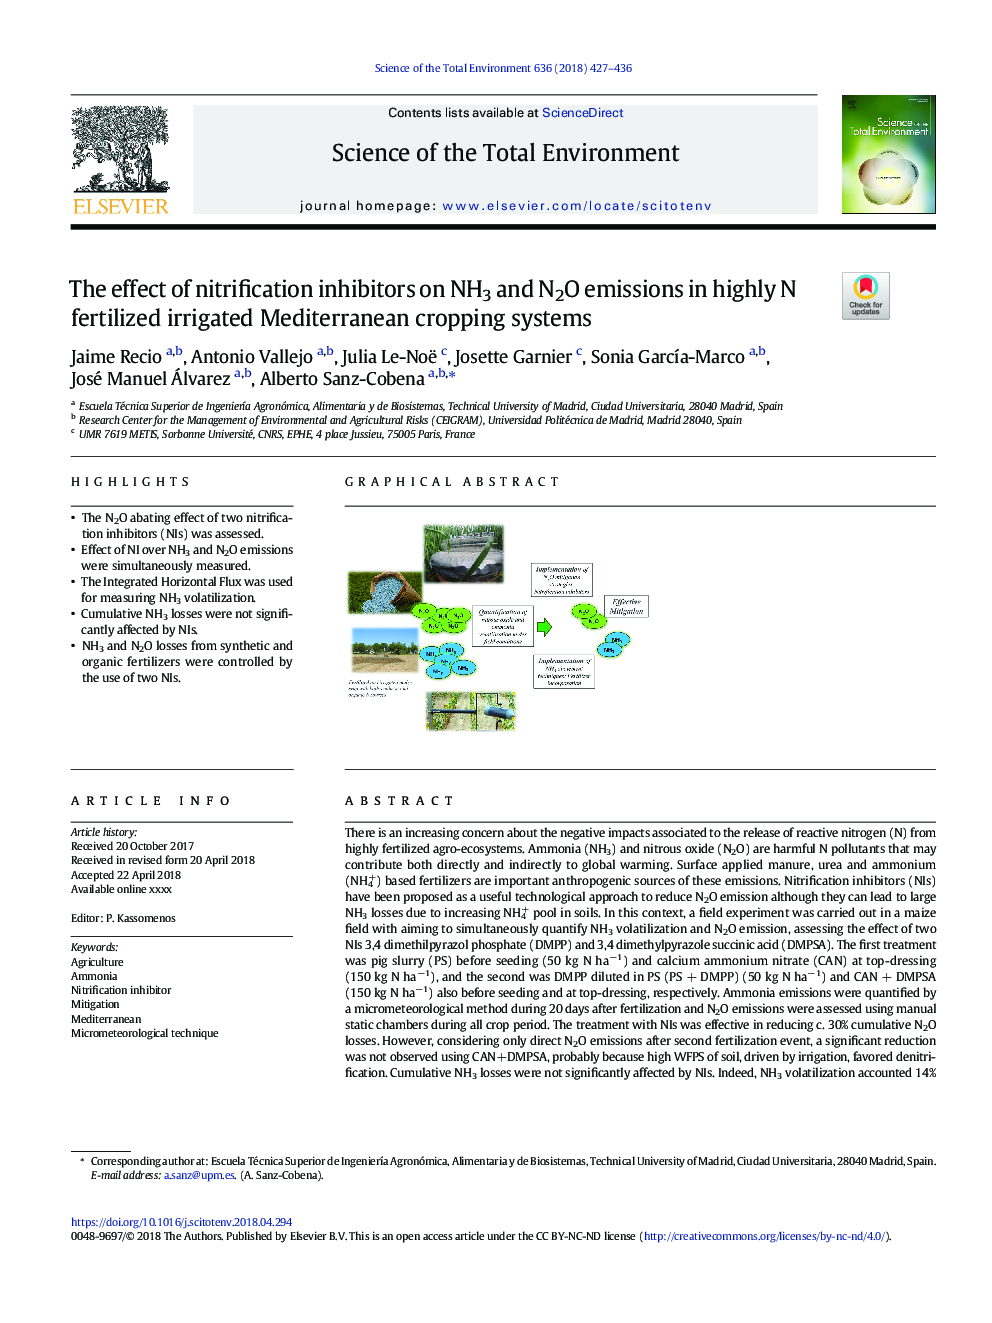 The effect of nitrification inhibitors on NH3 and N2O emissions in highly N fertilized irrigated Mediterranean cropping systems